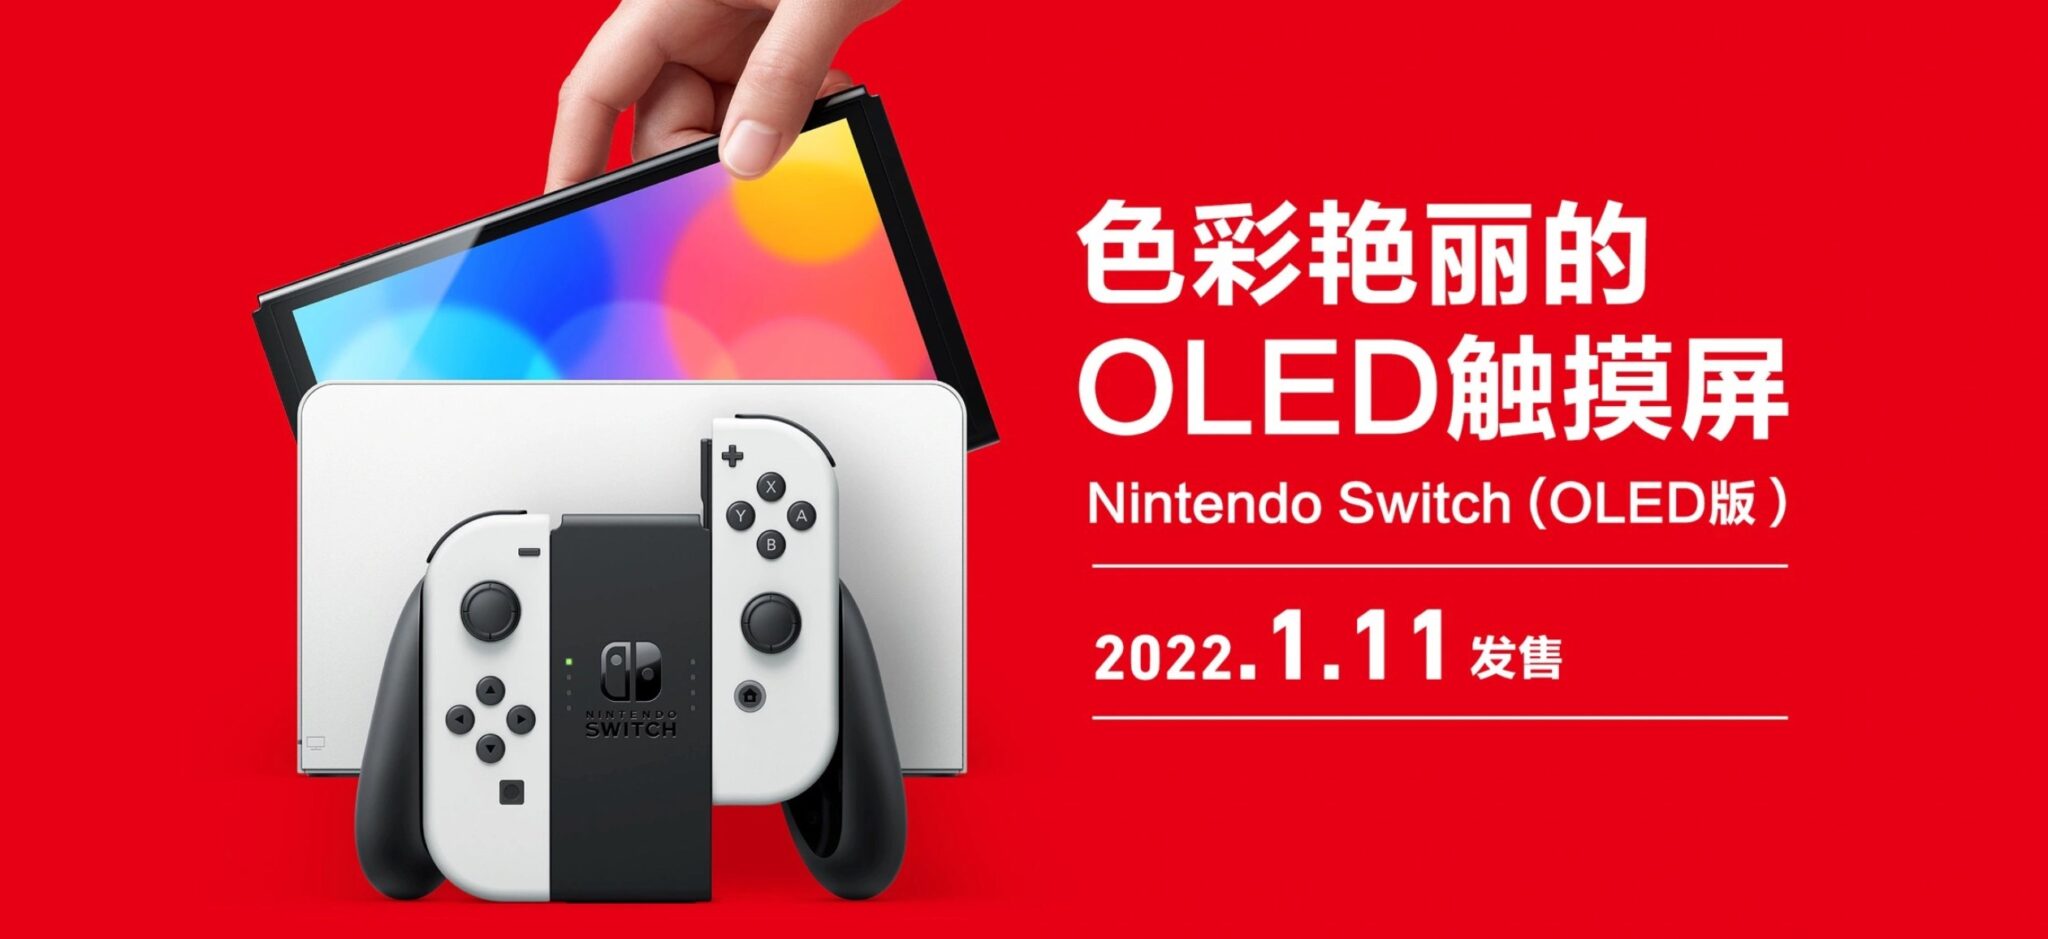 Nintendo Switch OLED Model to be released January 11th 2022 in mainland China